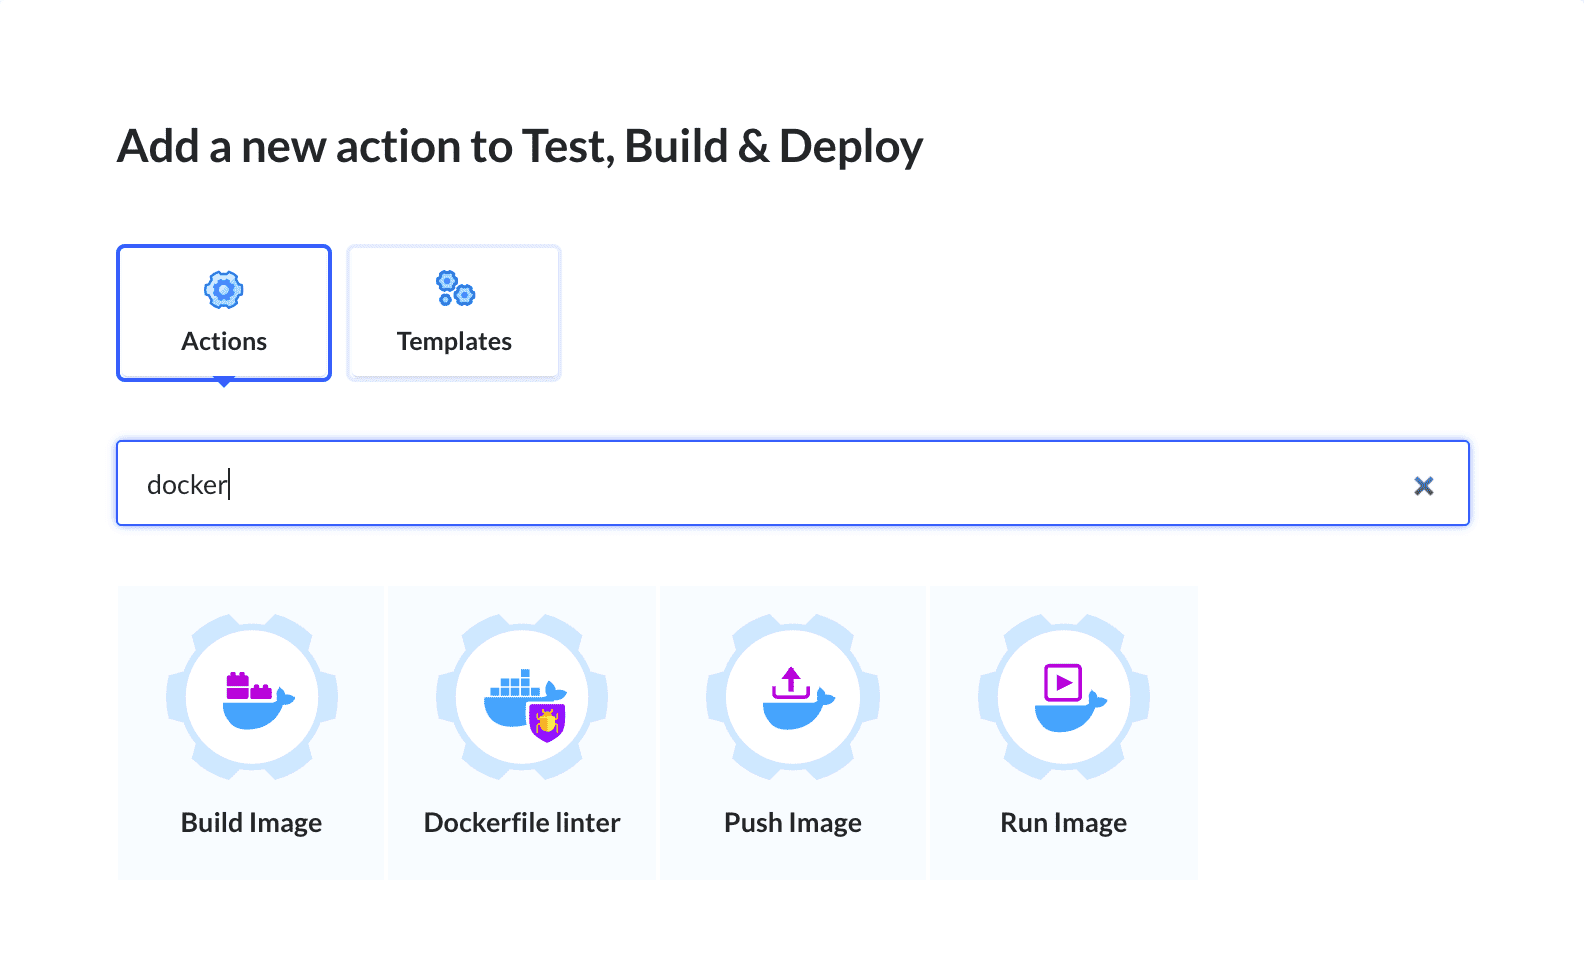 Adding Build Image action to the pipeline